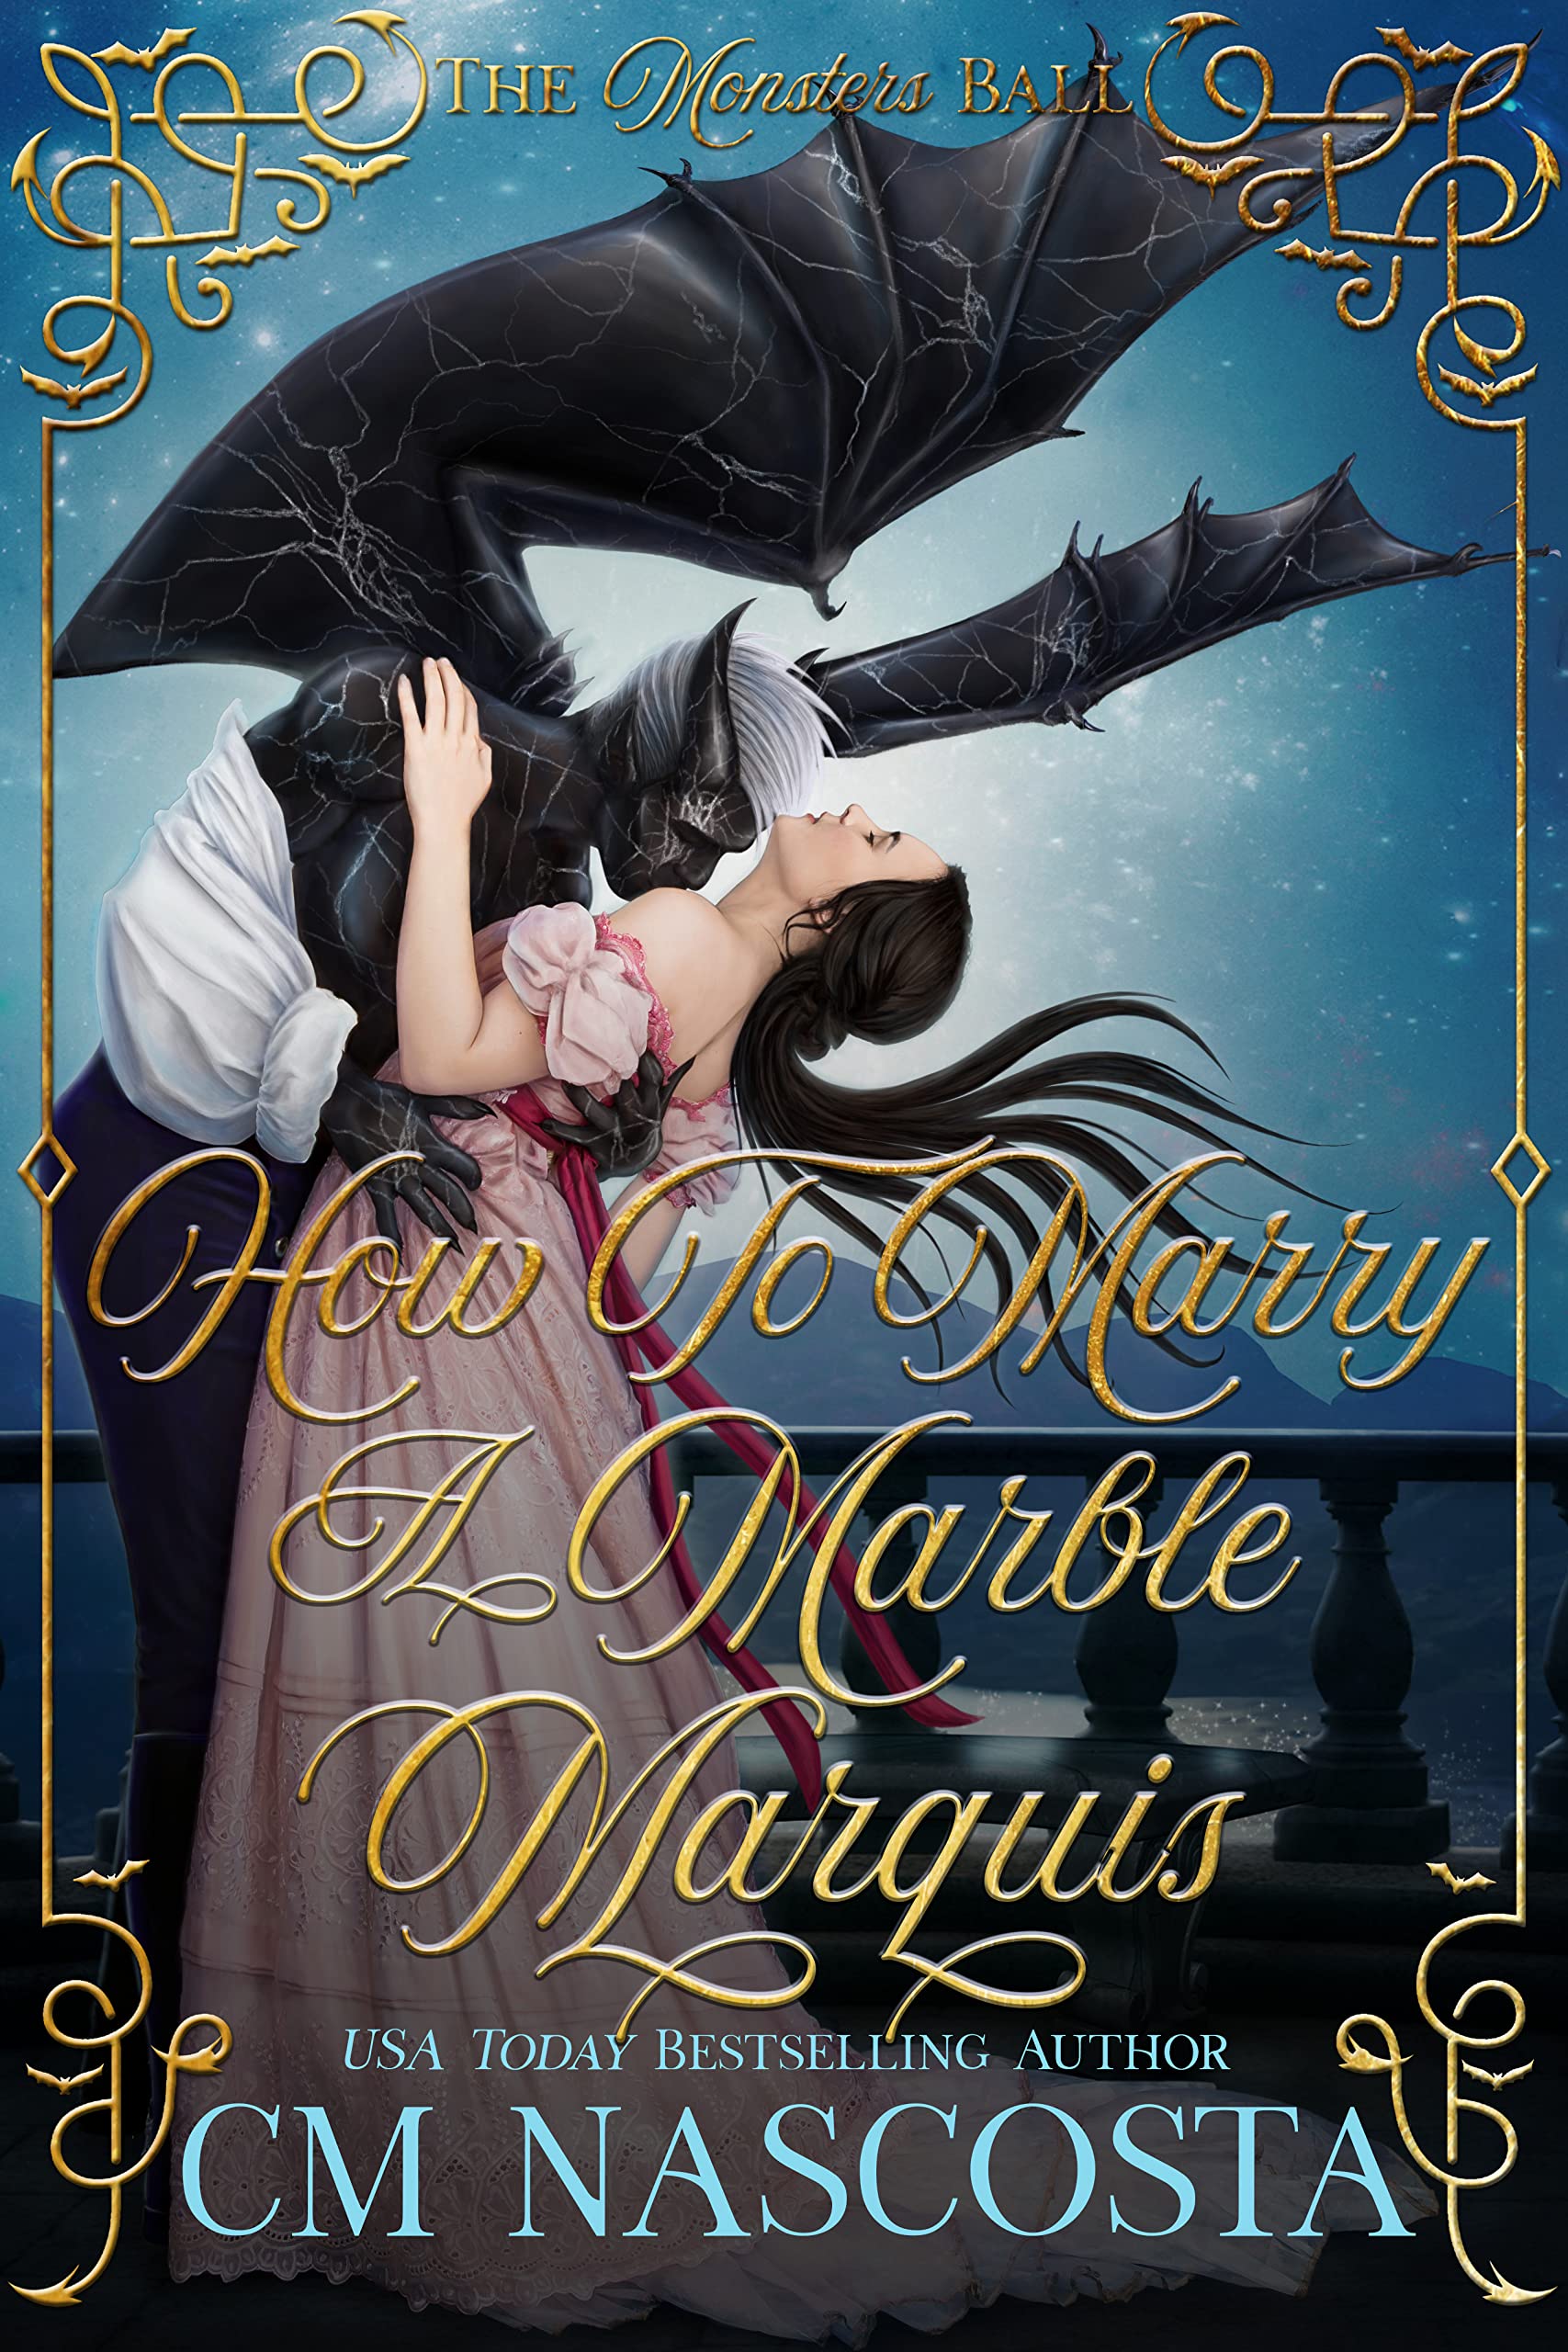 How To Marry A Marble Marquis by C.M. Nascosta PDF Download